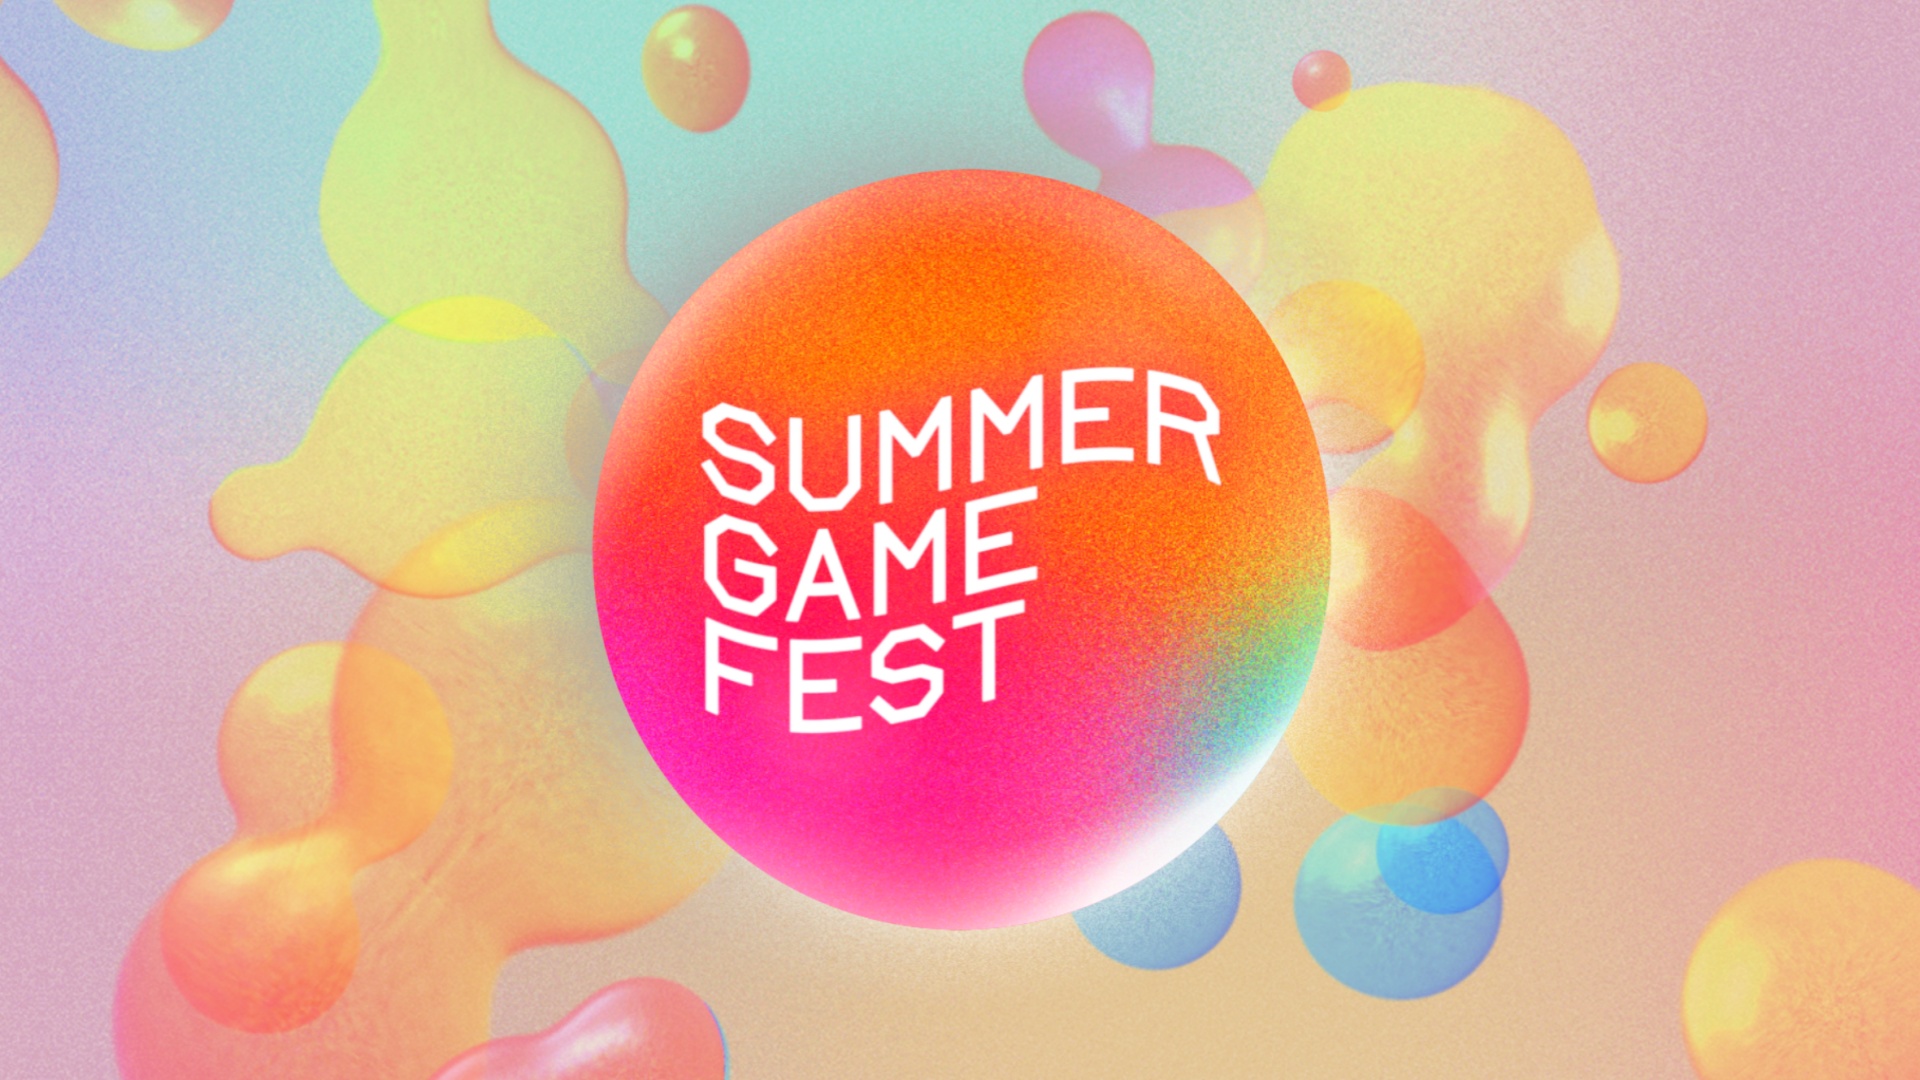 What’s on the cards for this weekend’s Summer Game Fest [Video]